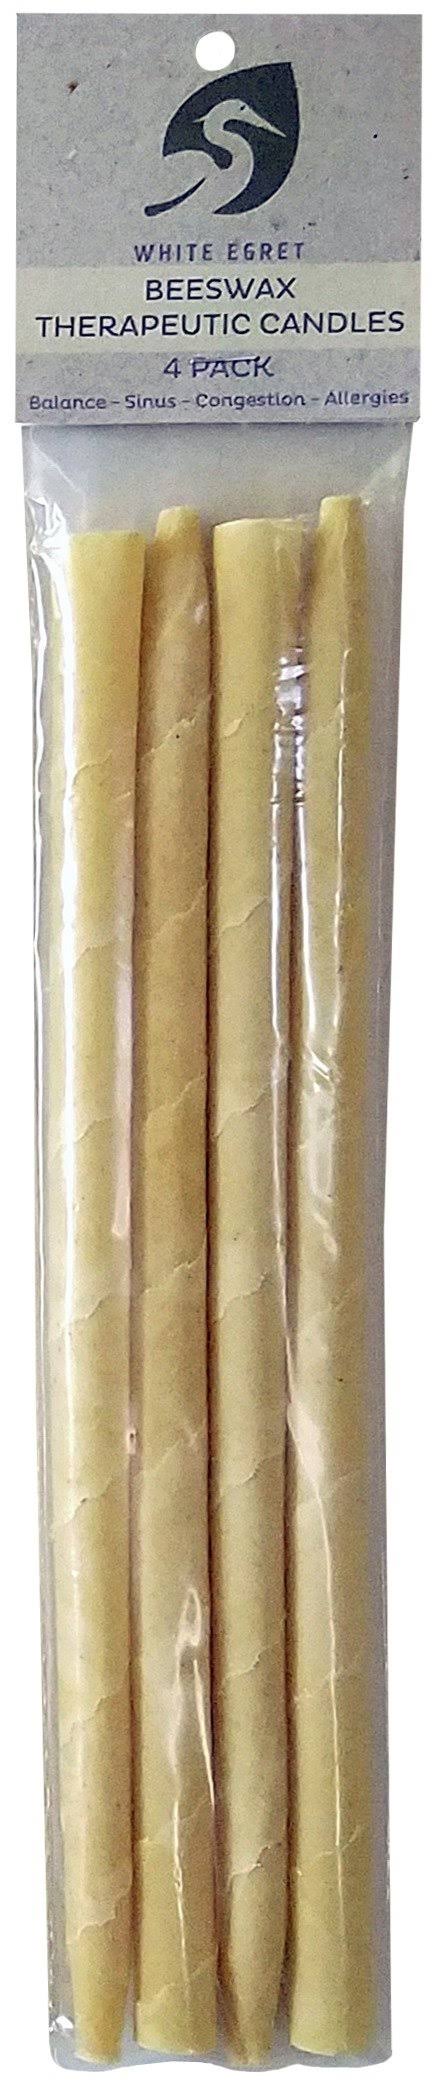 White Egret Personal Care, Beeswax, Therapeutic Candles, 4 Pack